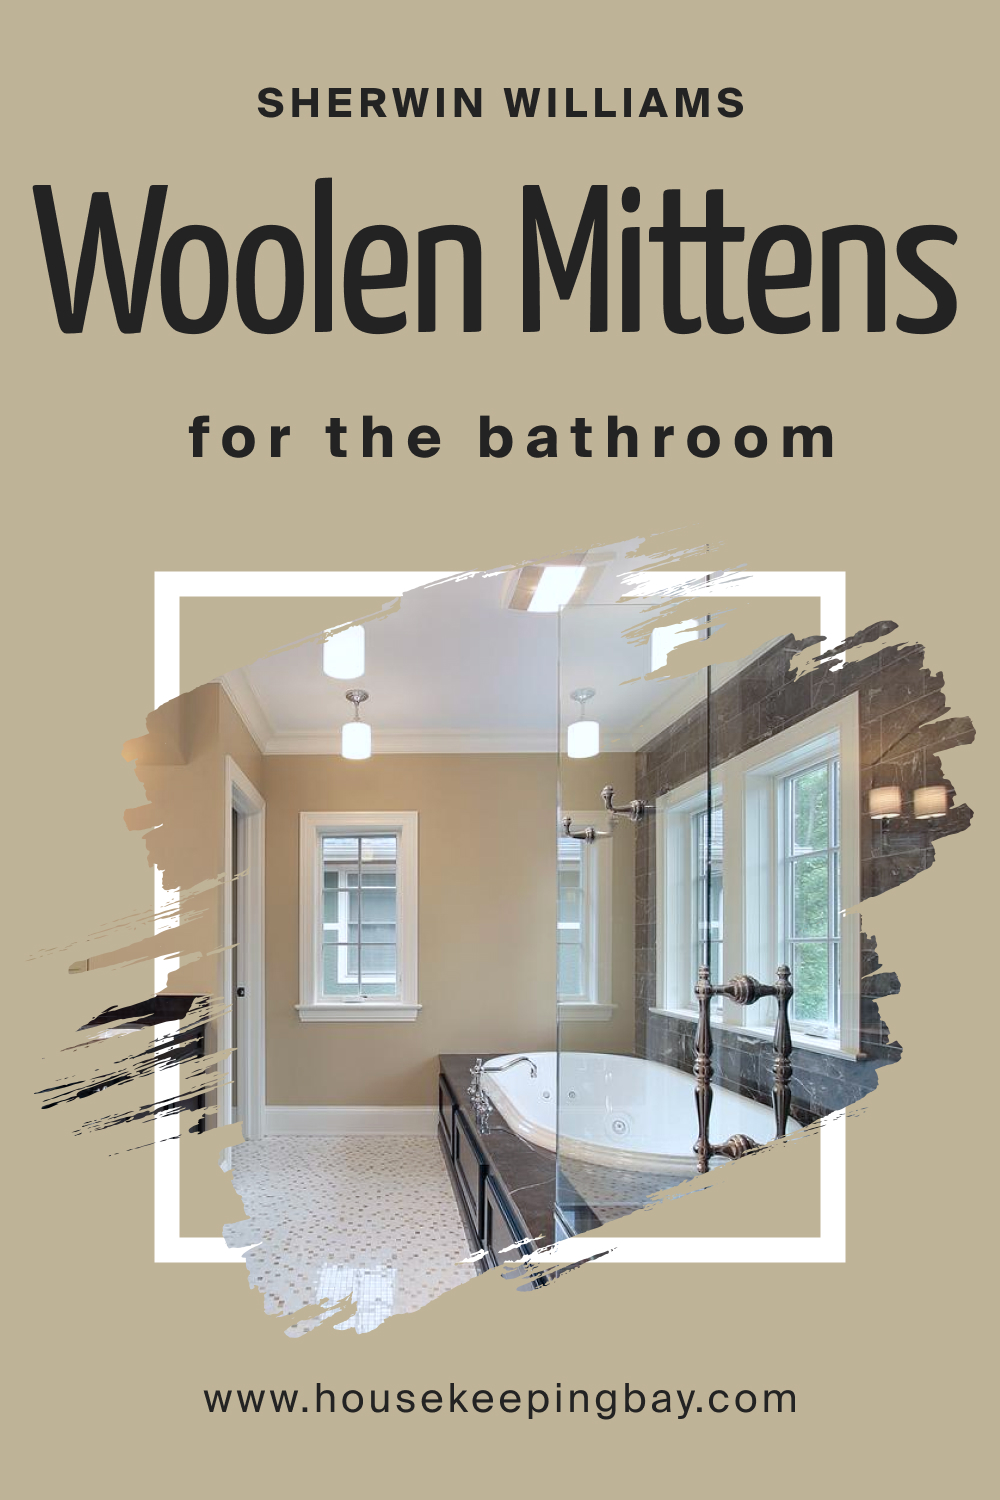 Sherwin Williams. SW 9526 Woolen Mittens For the Bathroom